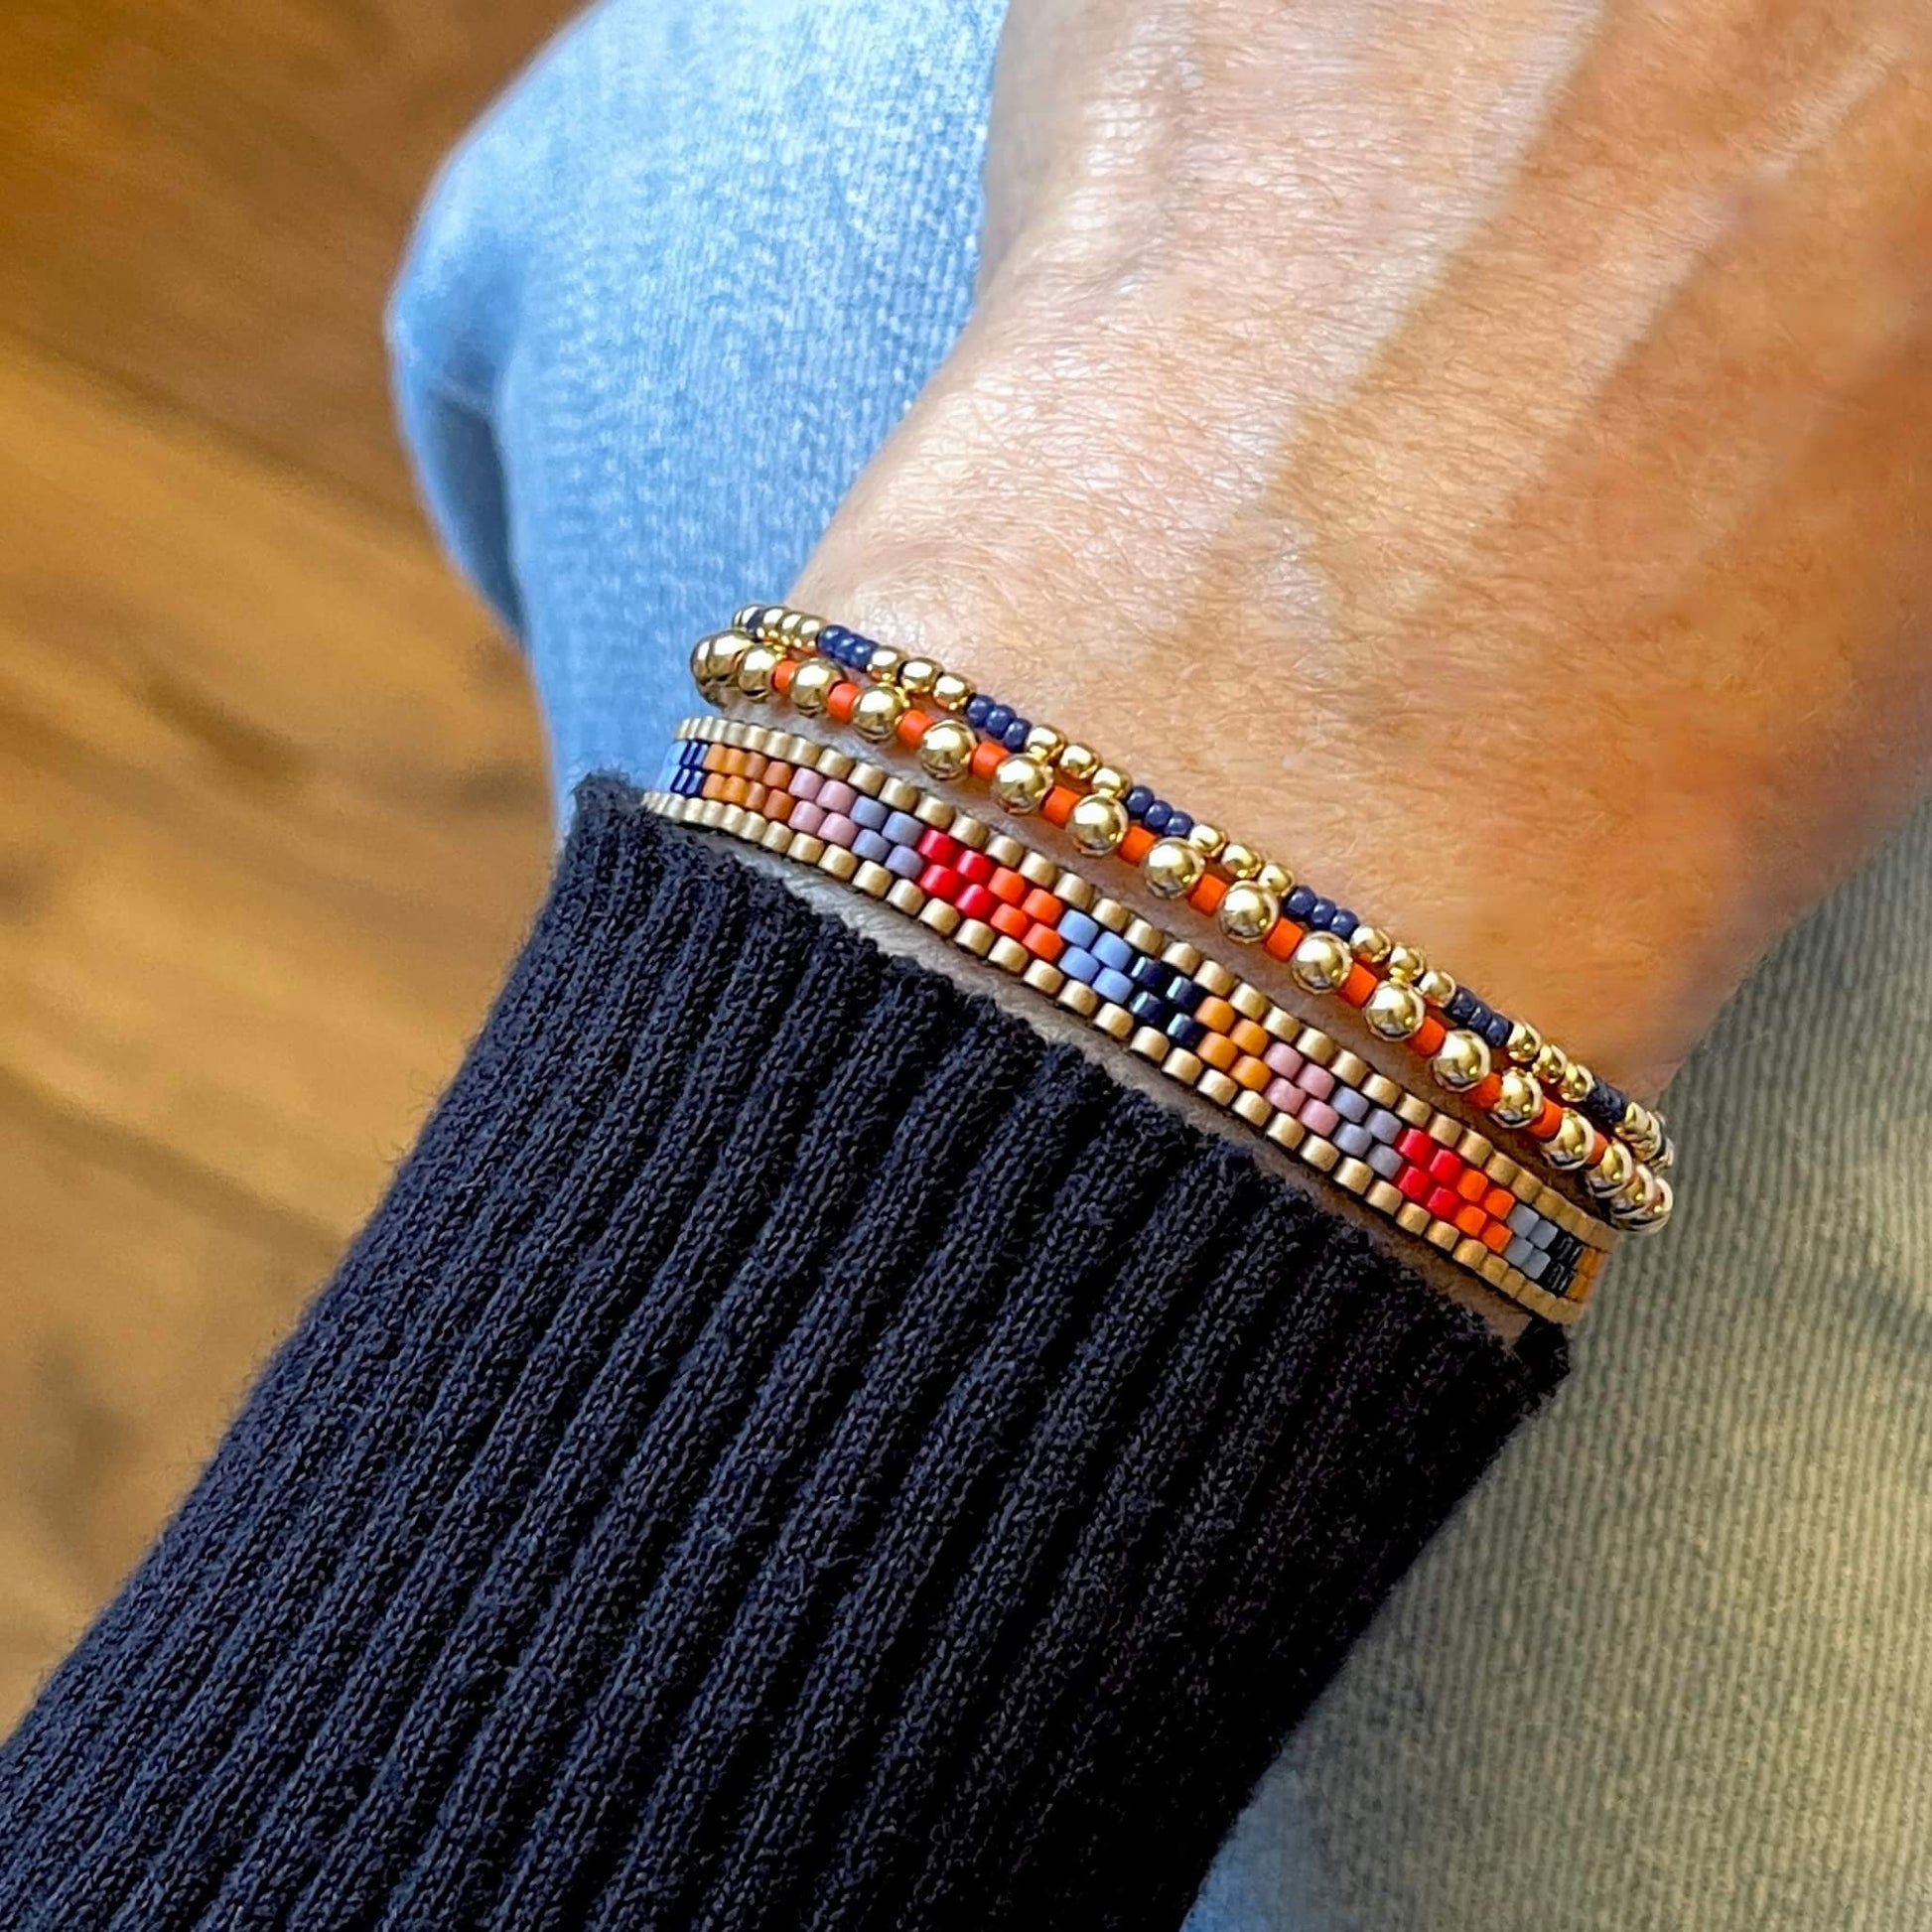 Thin beaded bracelet set with colorful striped band and orange and blue tiny seed bead stretch bracelets with gold ball beads.